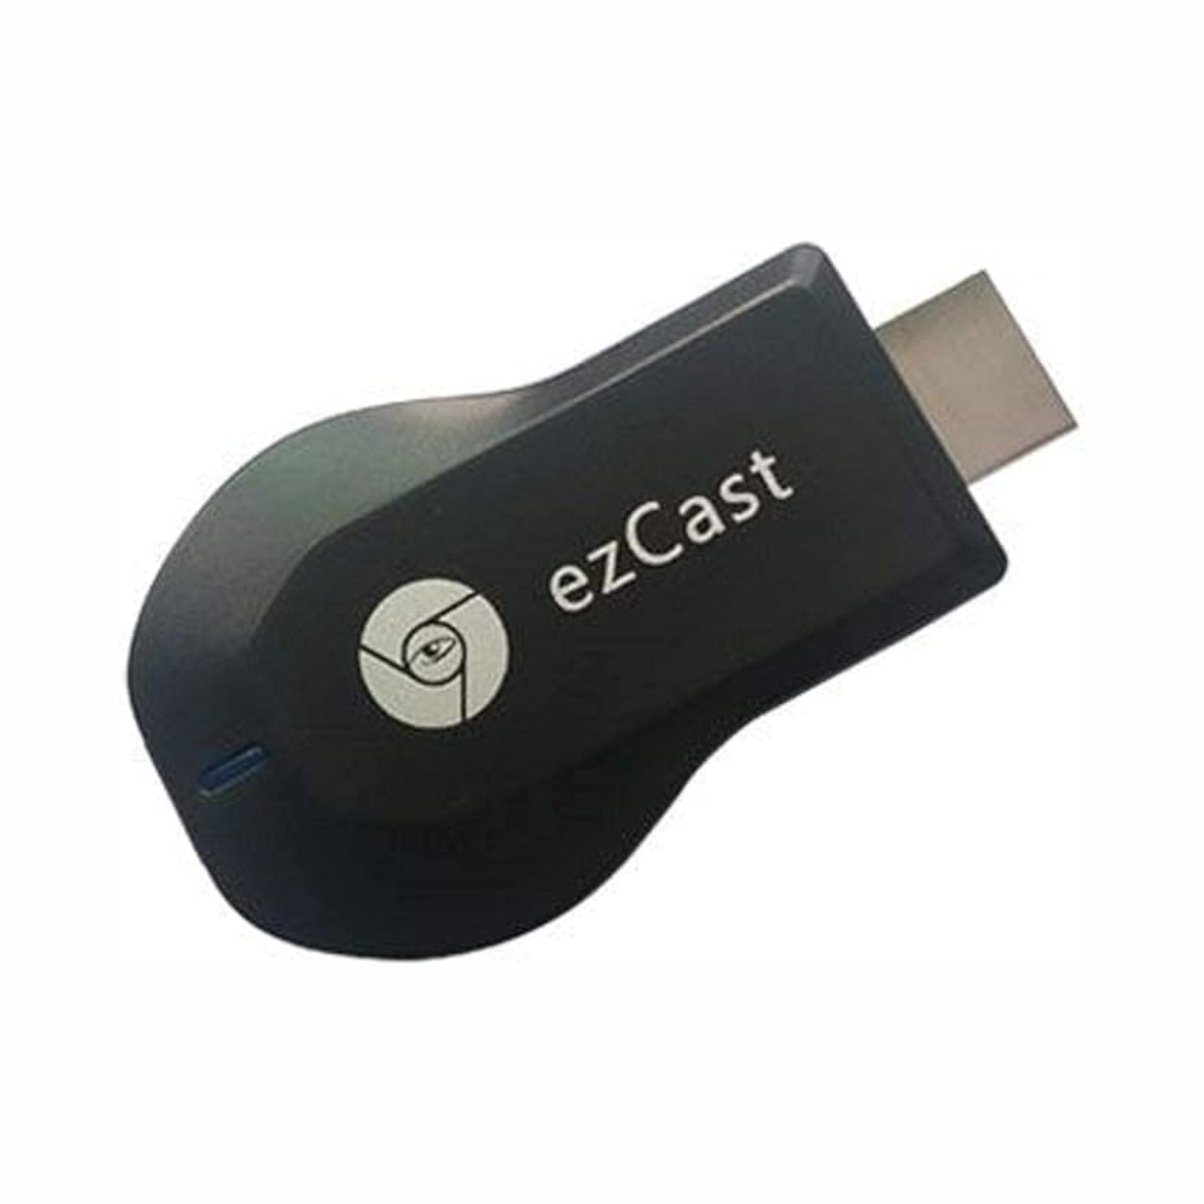 TV Stick HDMI 1080P Miracast DLNA WiFi Display Receiver Dongle for Windows iOS, Andriod